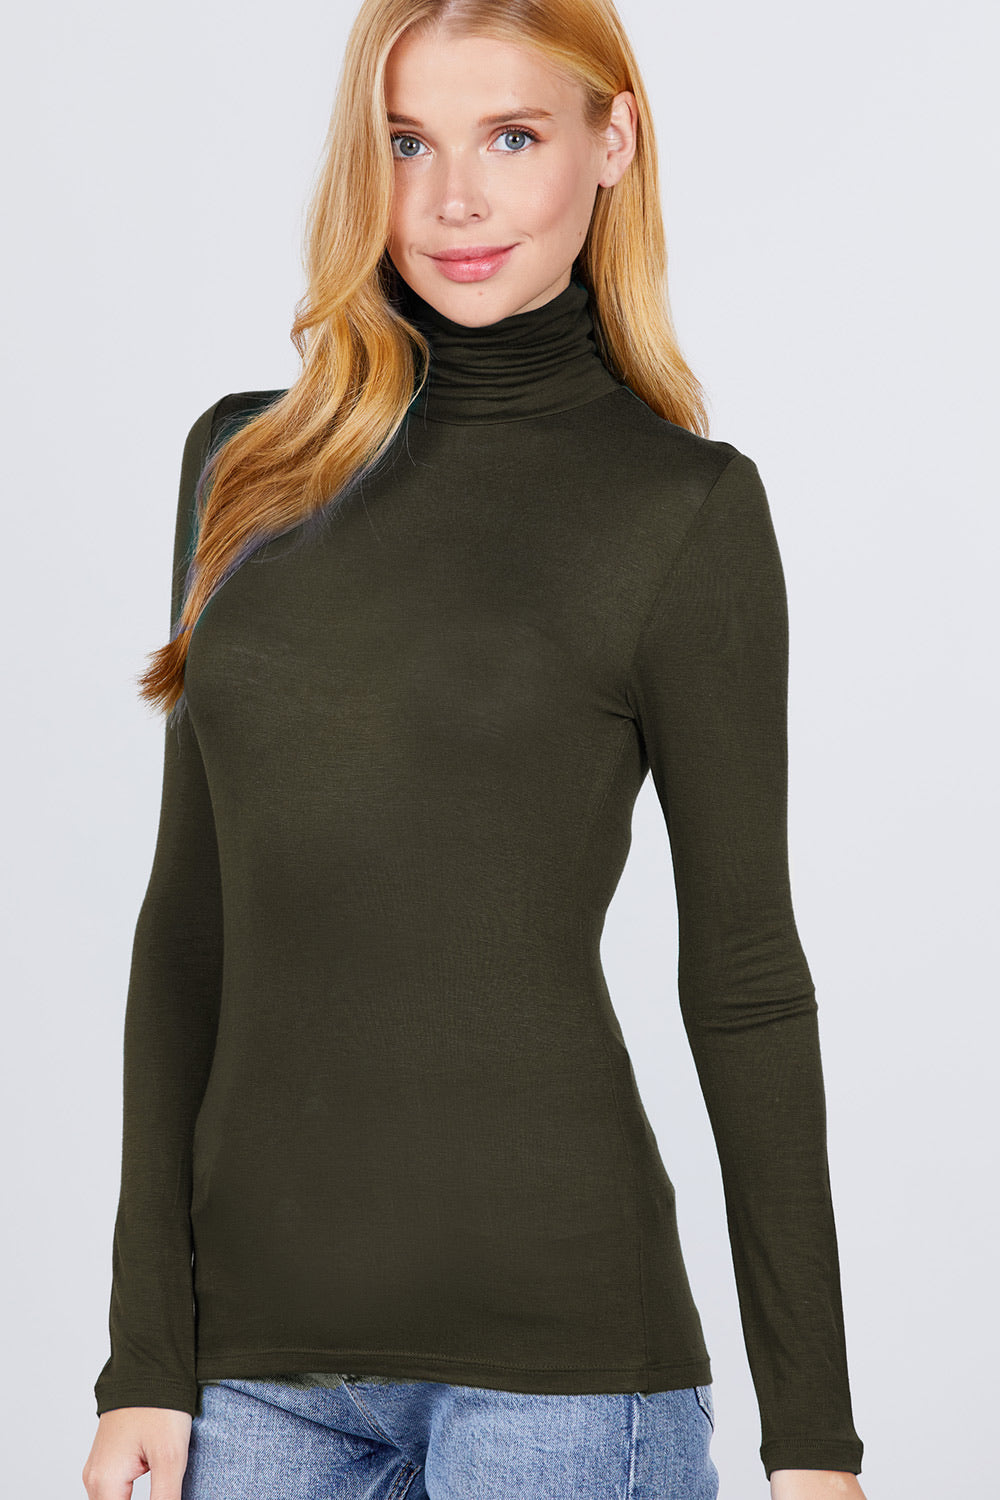 Forest turtle neck